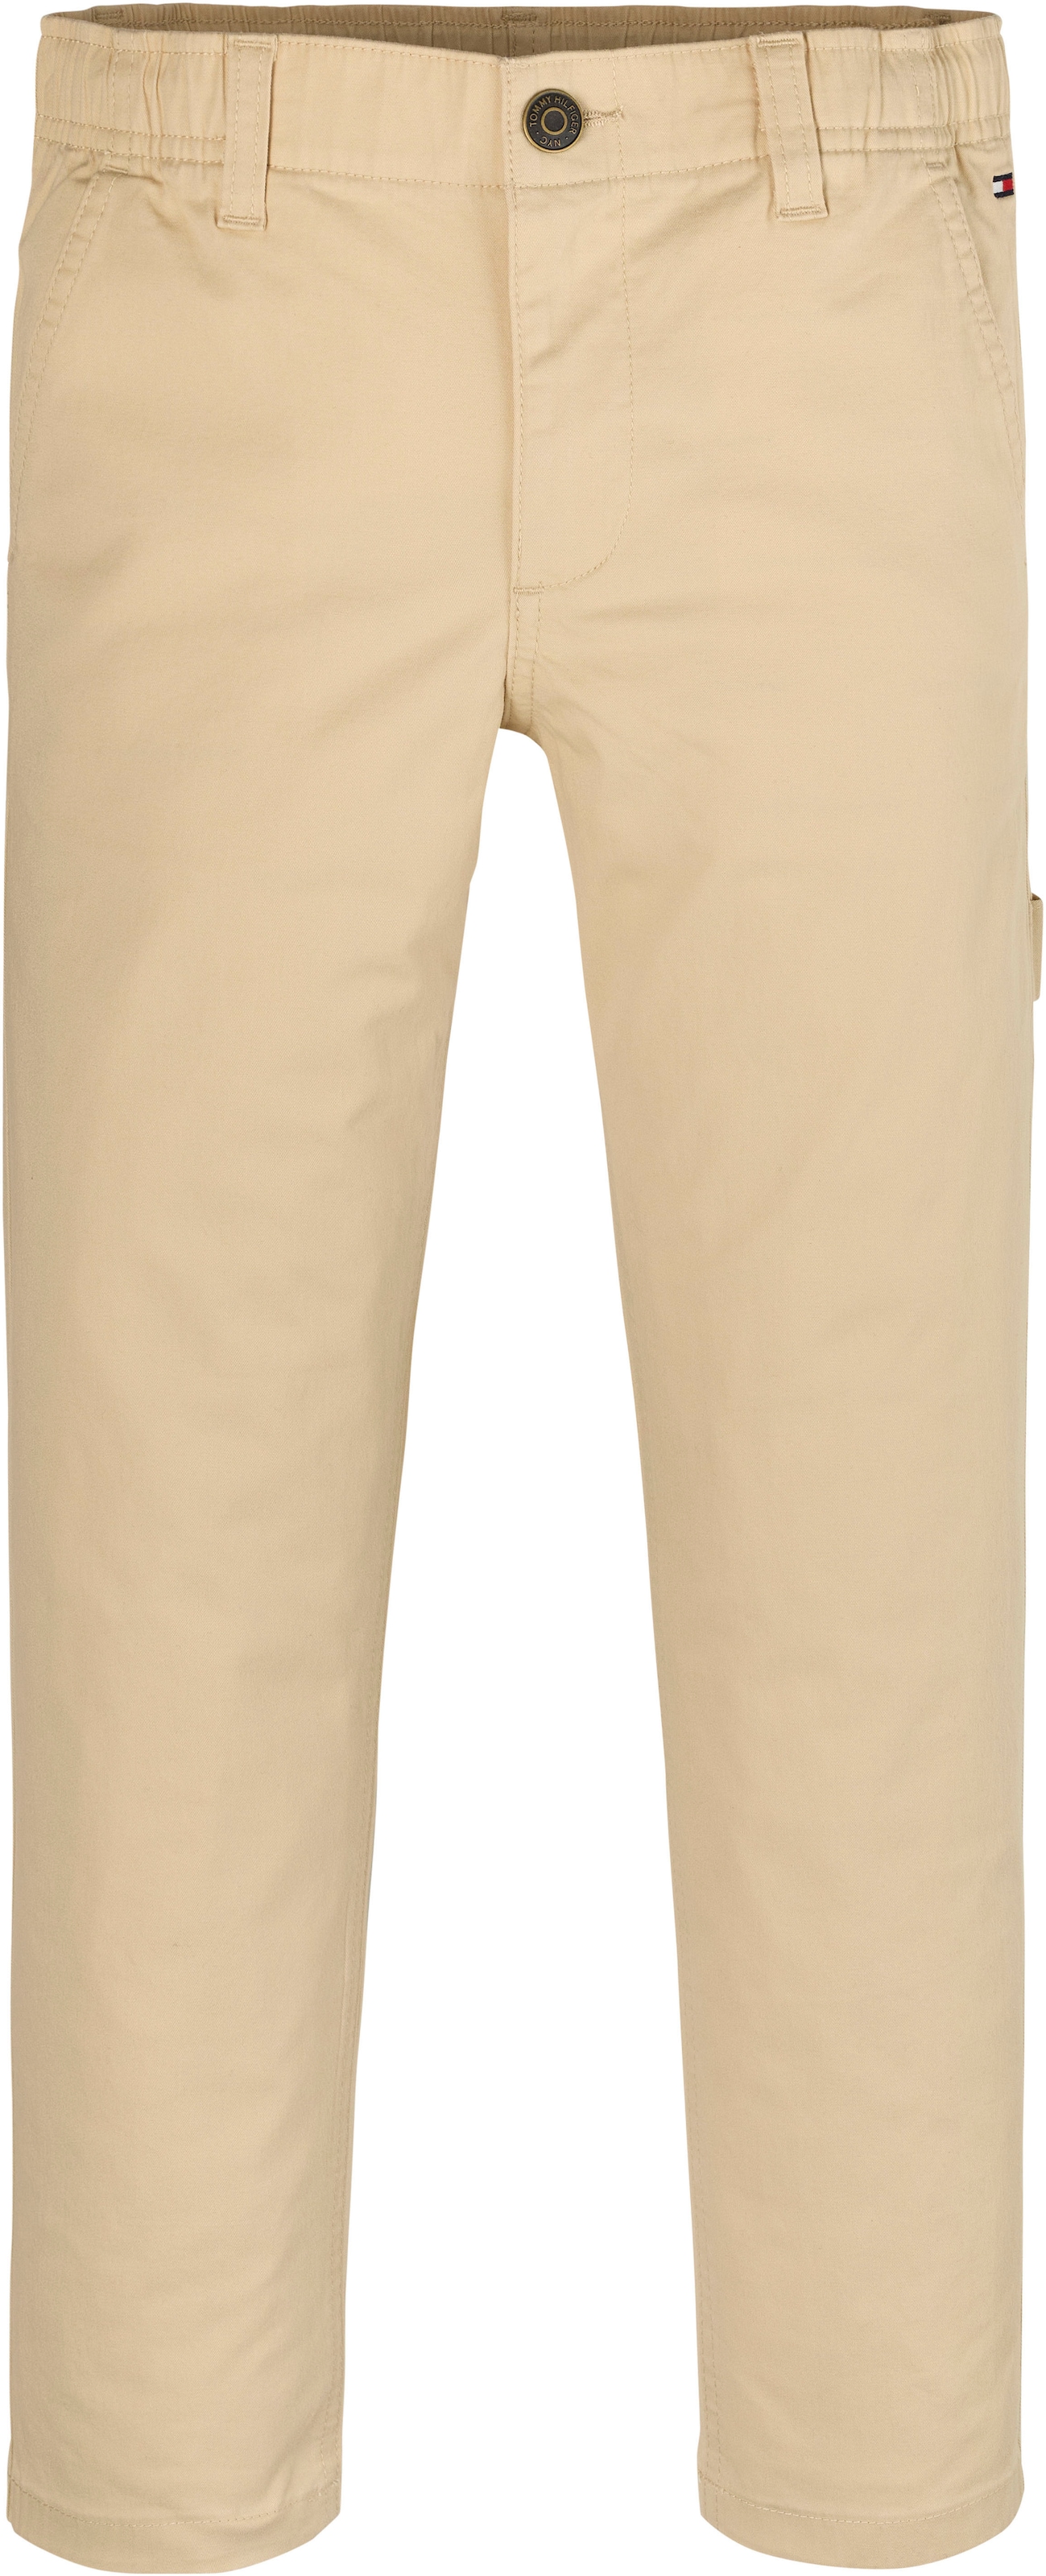 Tommy Hilfiger Webhose »SKATER PULL ON WOVEN PANTS«, mit Logostickerei